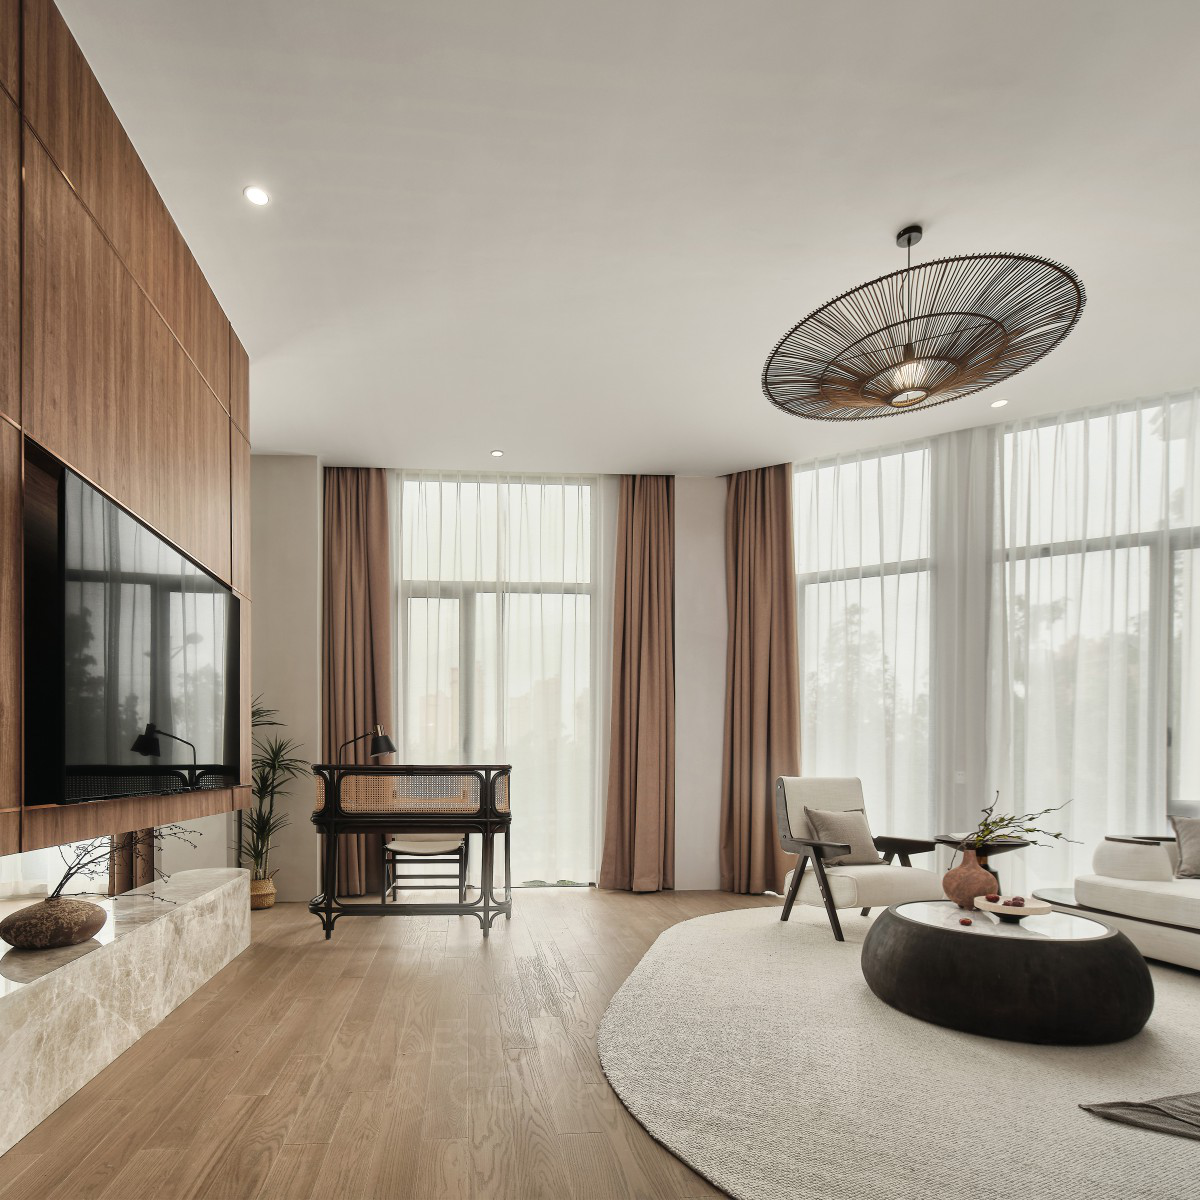 Shanghai Donggang Chengfu Residential Interior Design by Light and Shadow Design